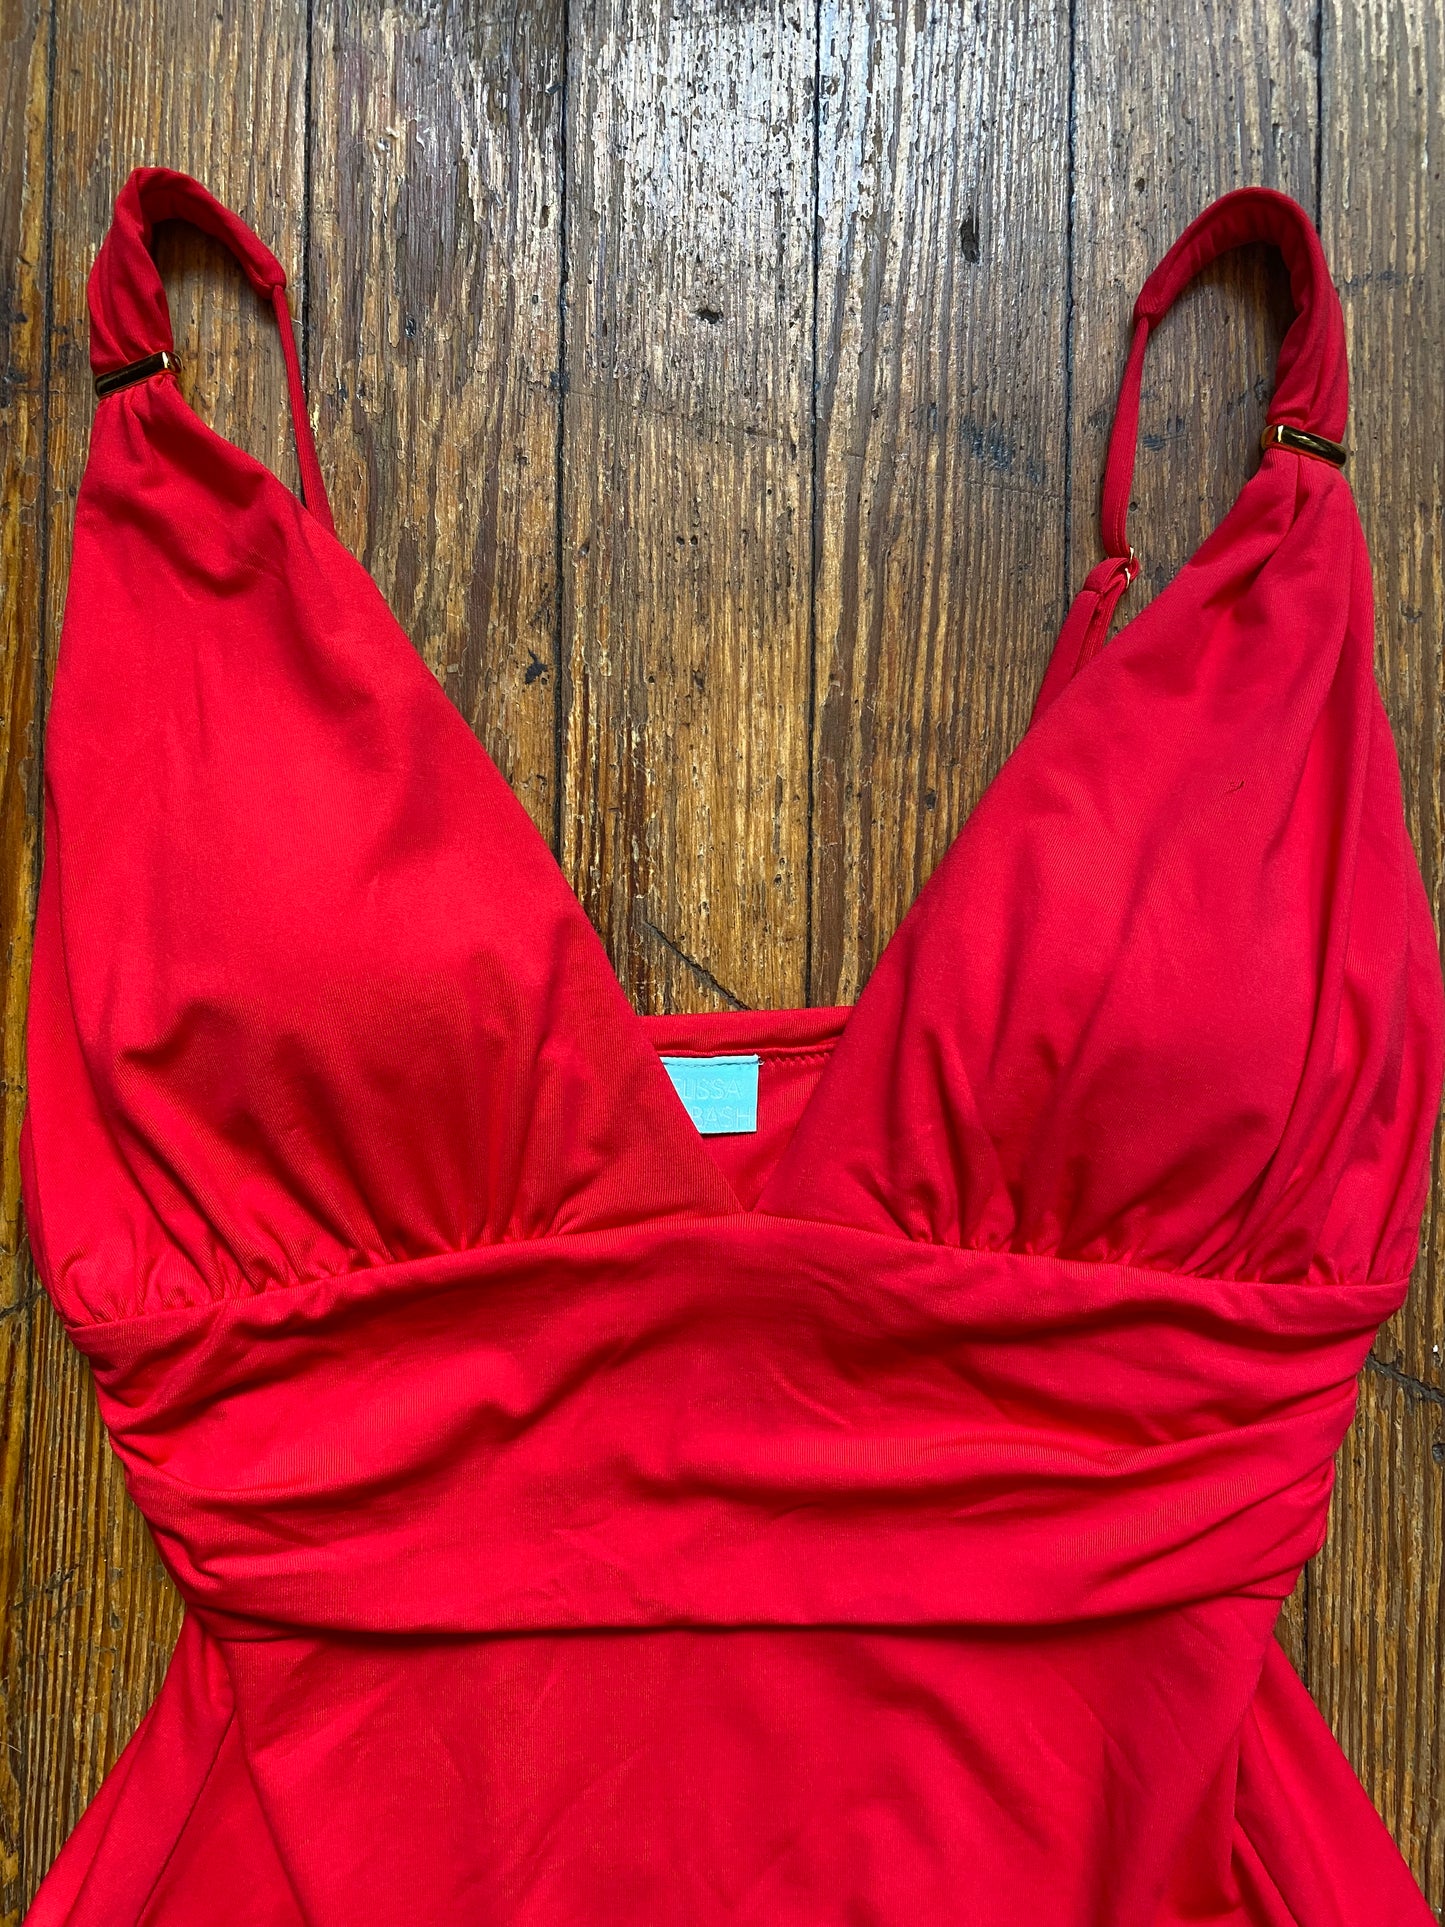 Bright Red w/ Gold Accents One Piece